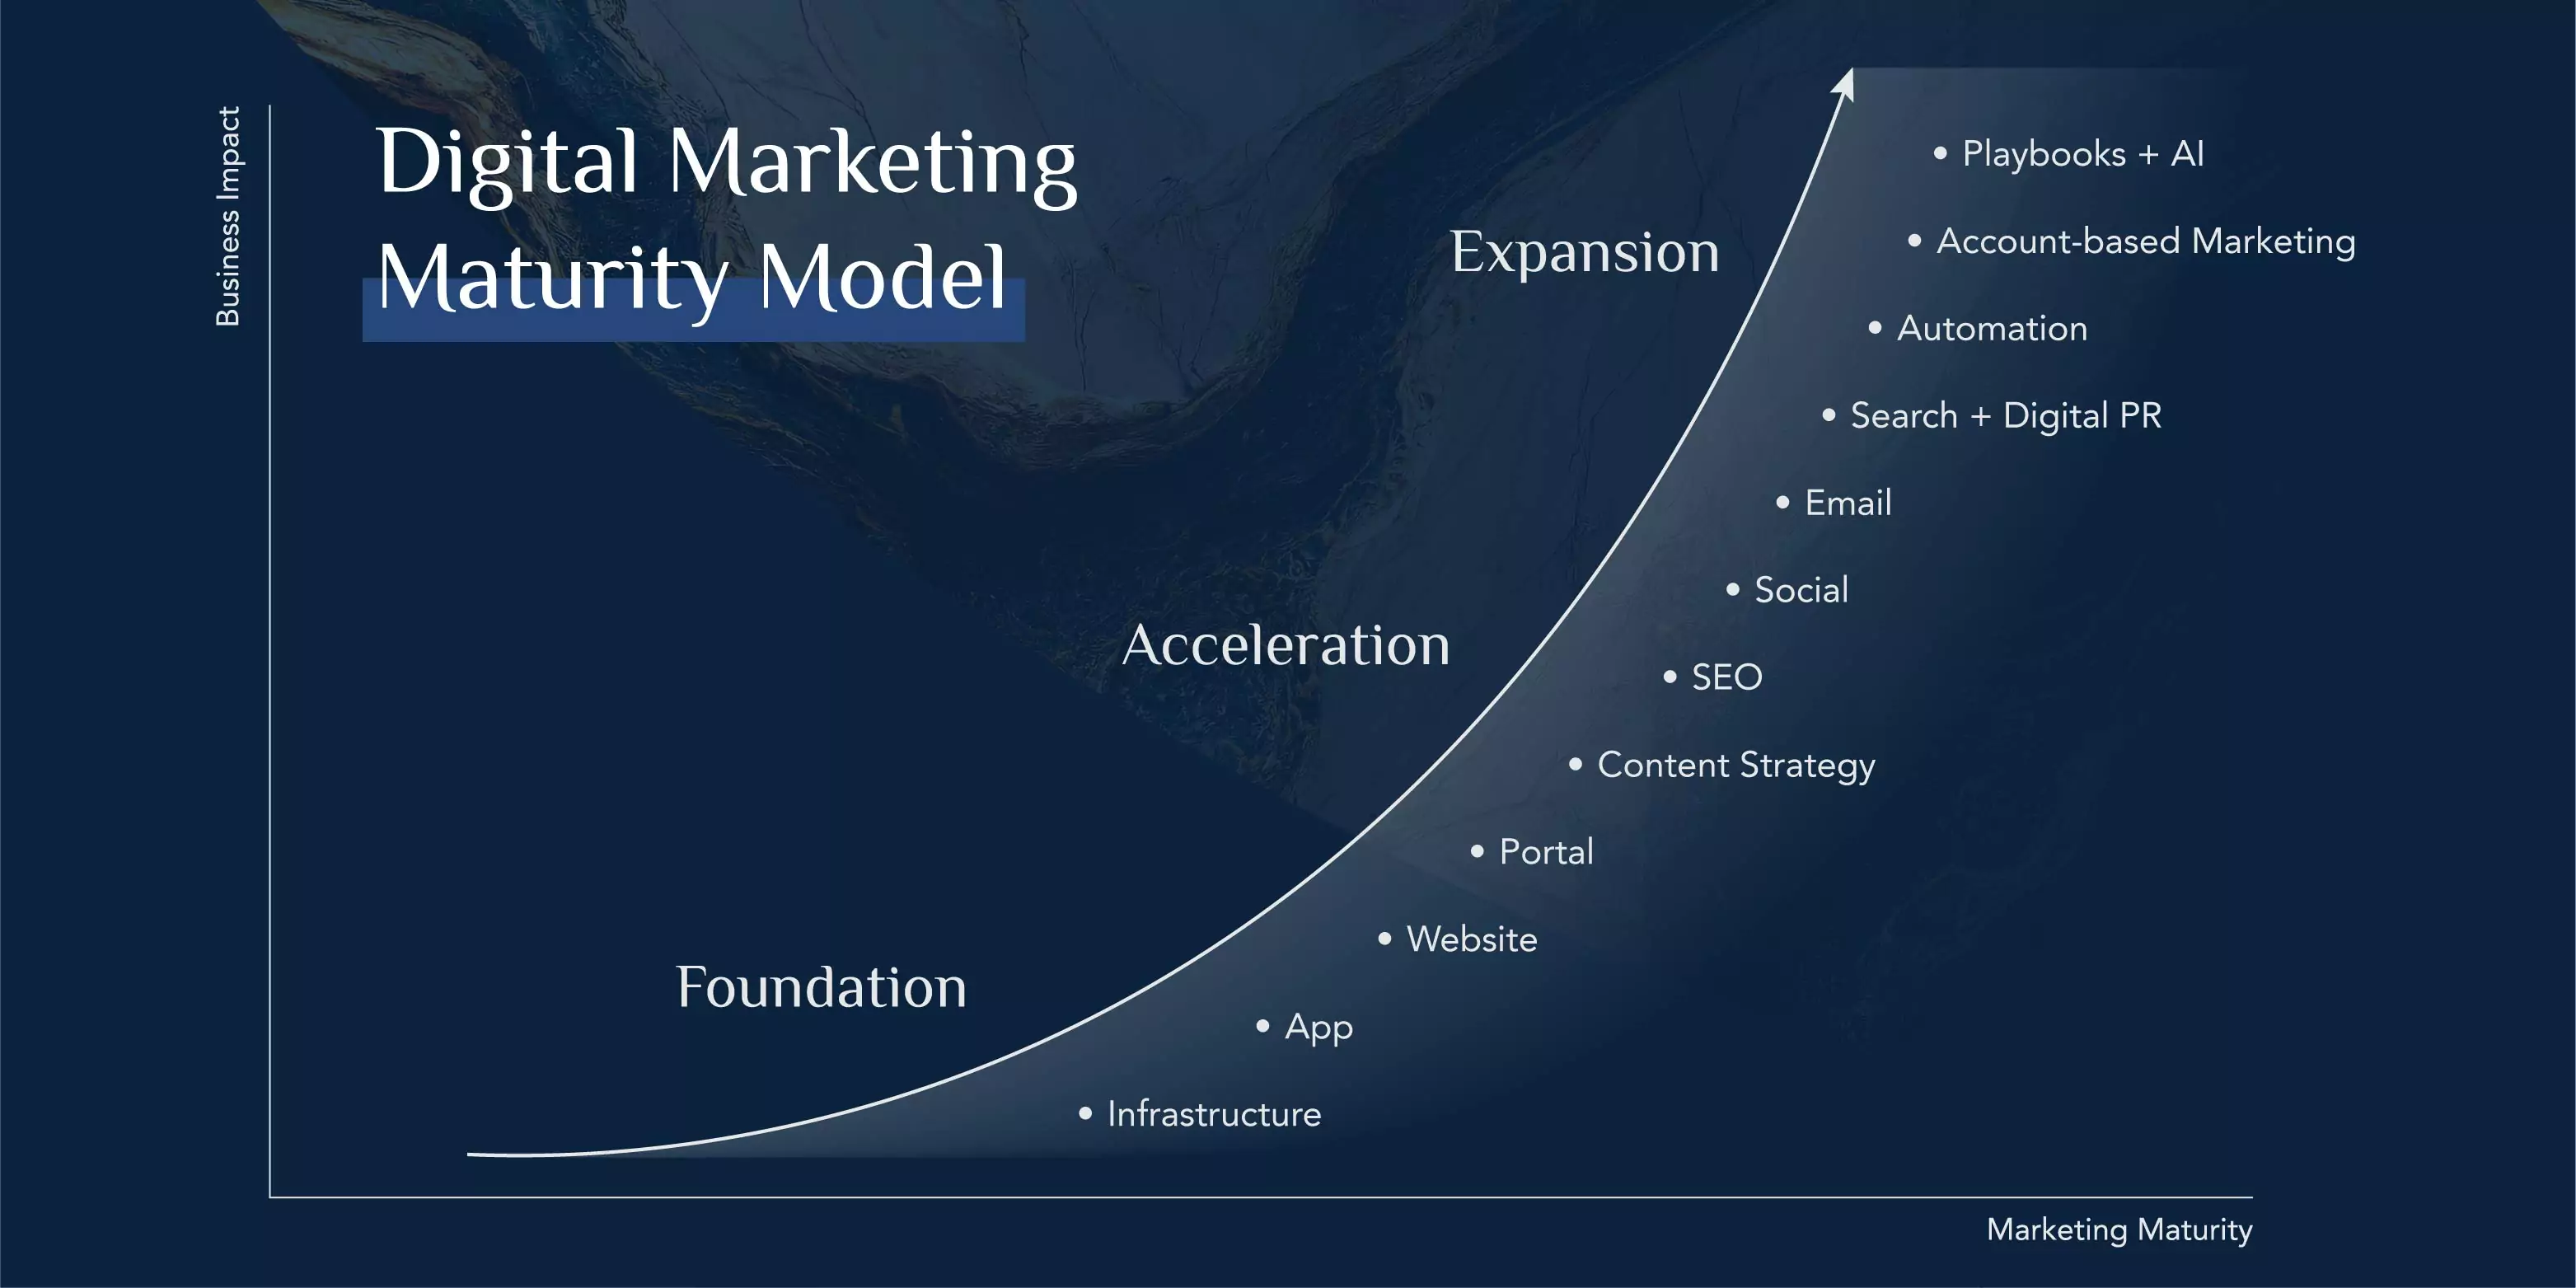 Digital marketing maturity model that demonstrates your marketing maturity level and the impact it has on your business